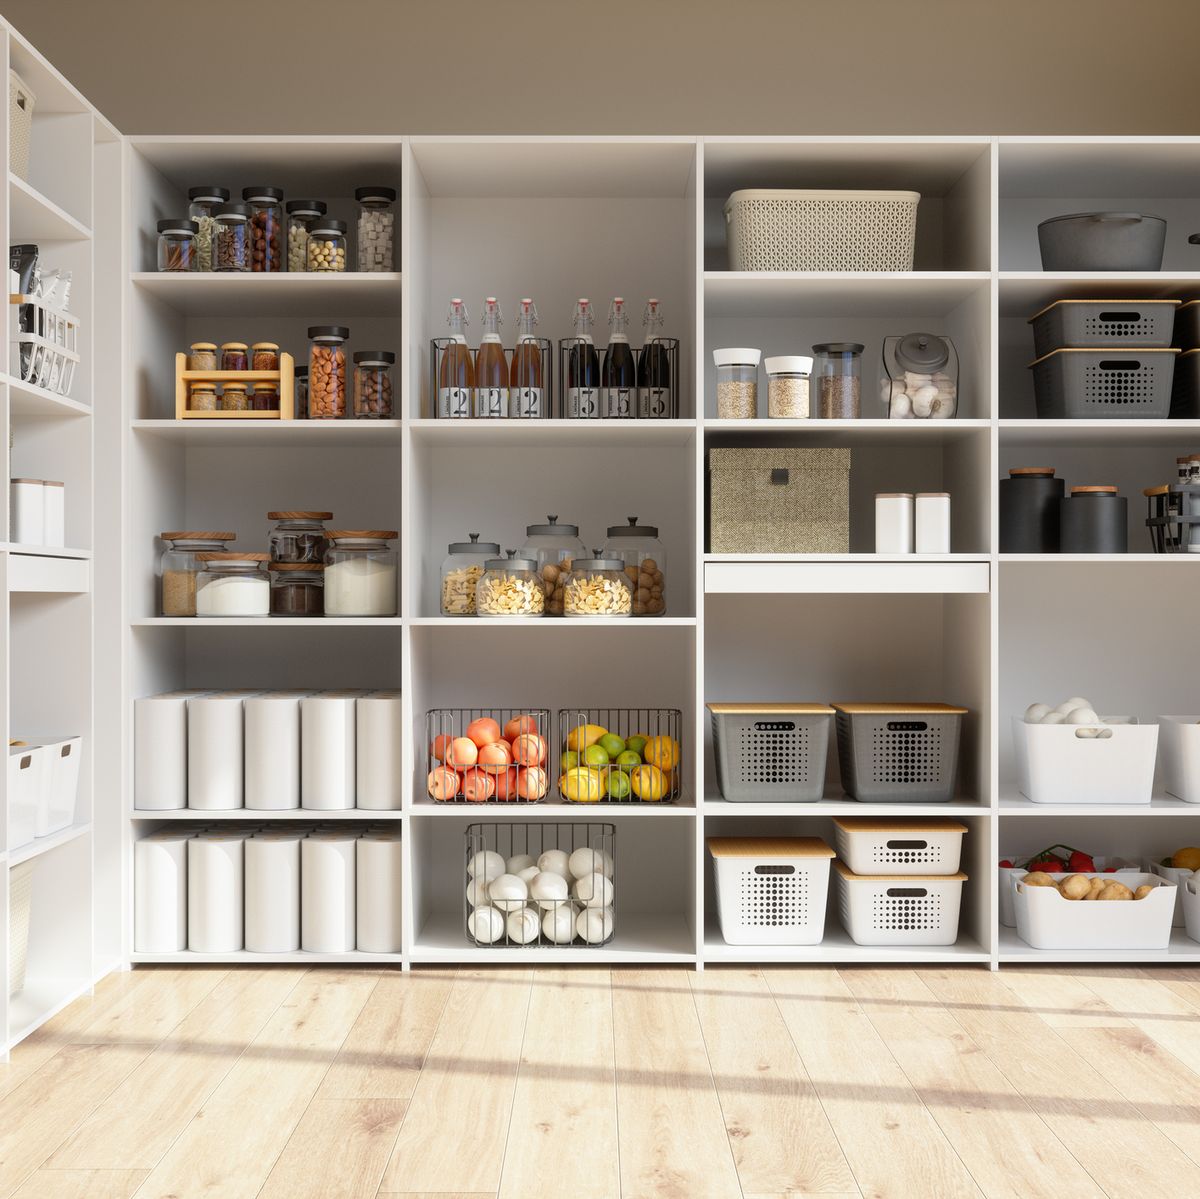 In-Home Organizing, Home